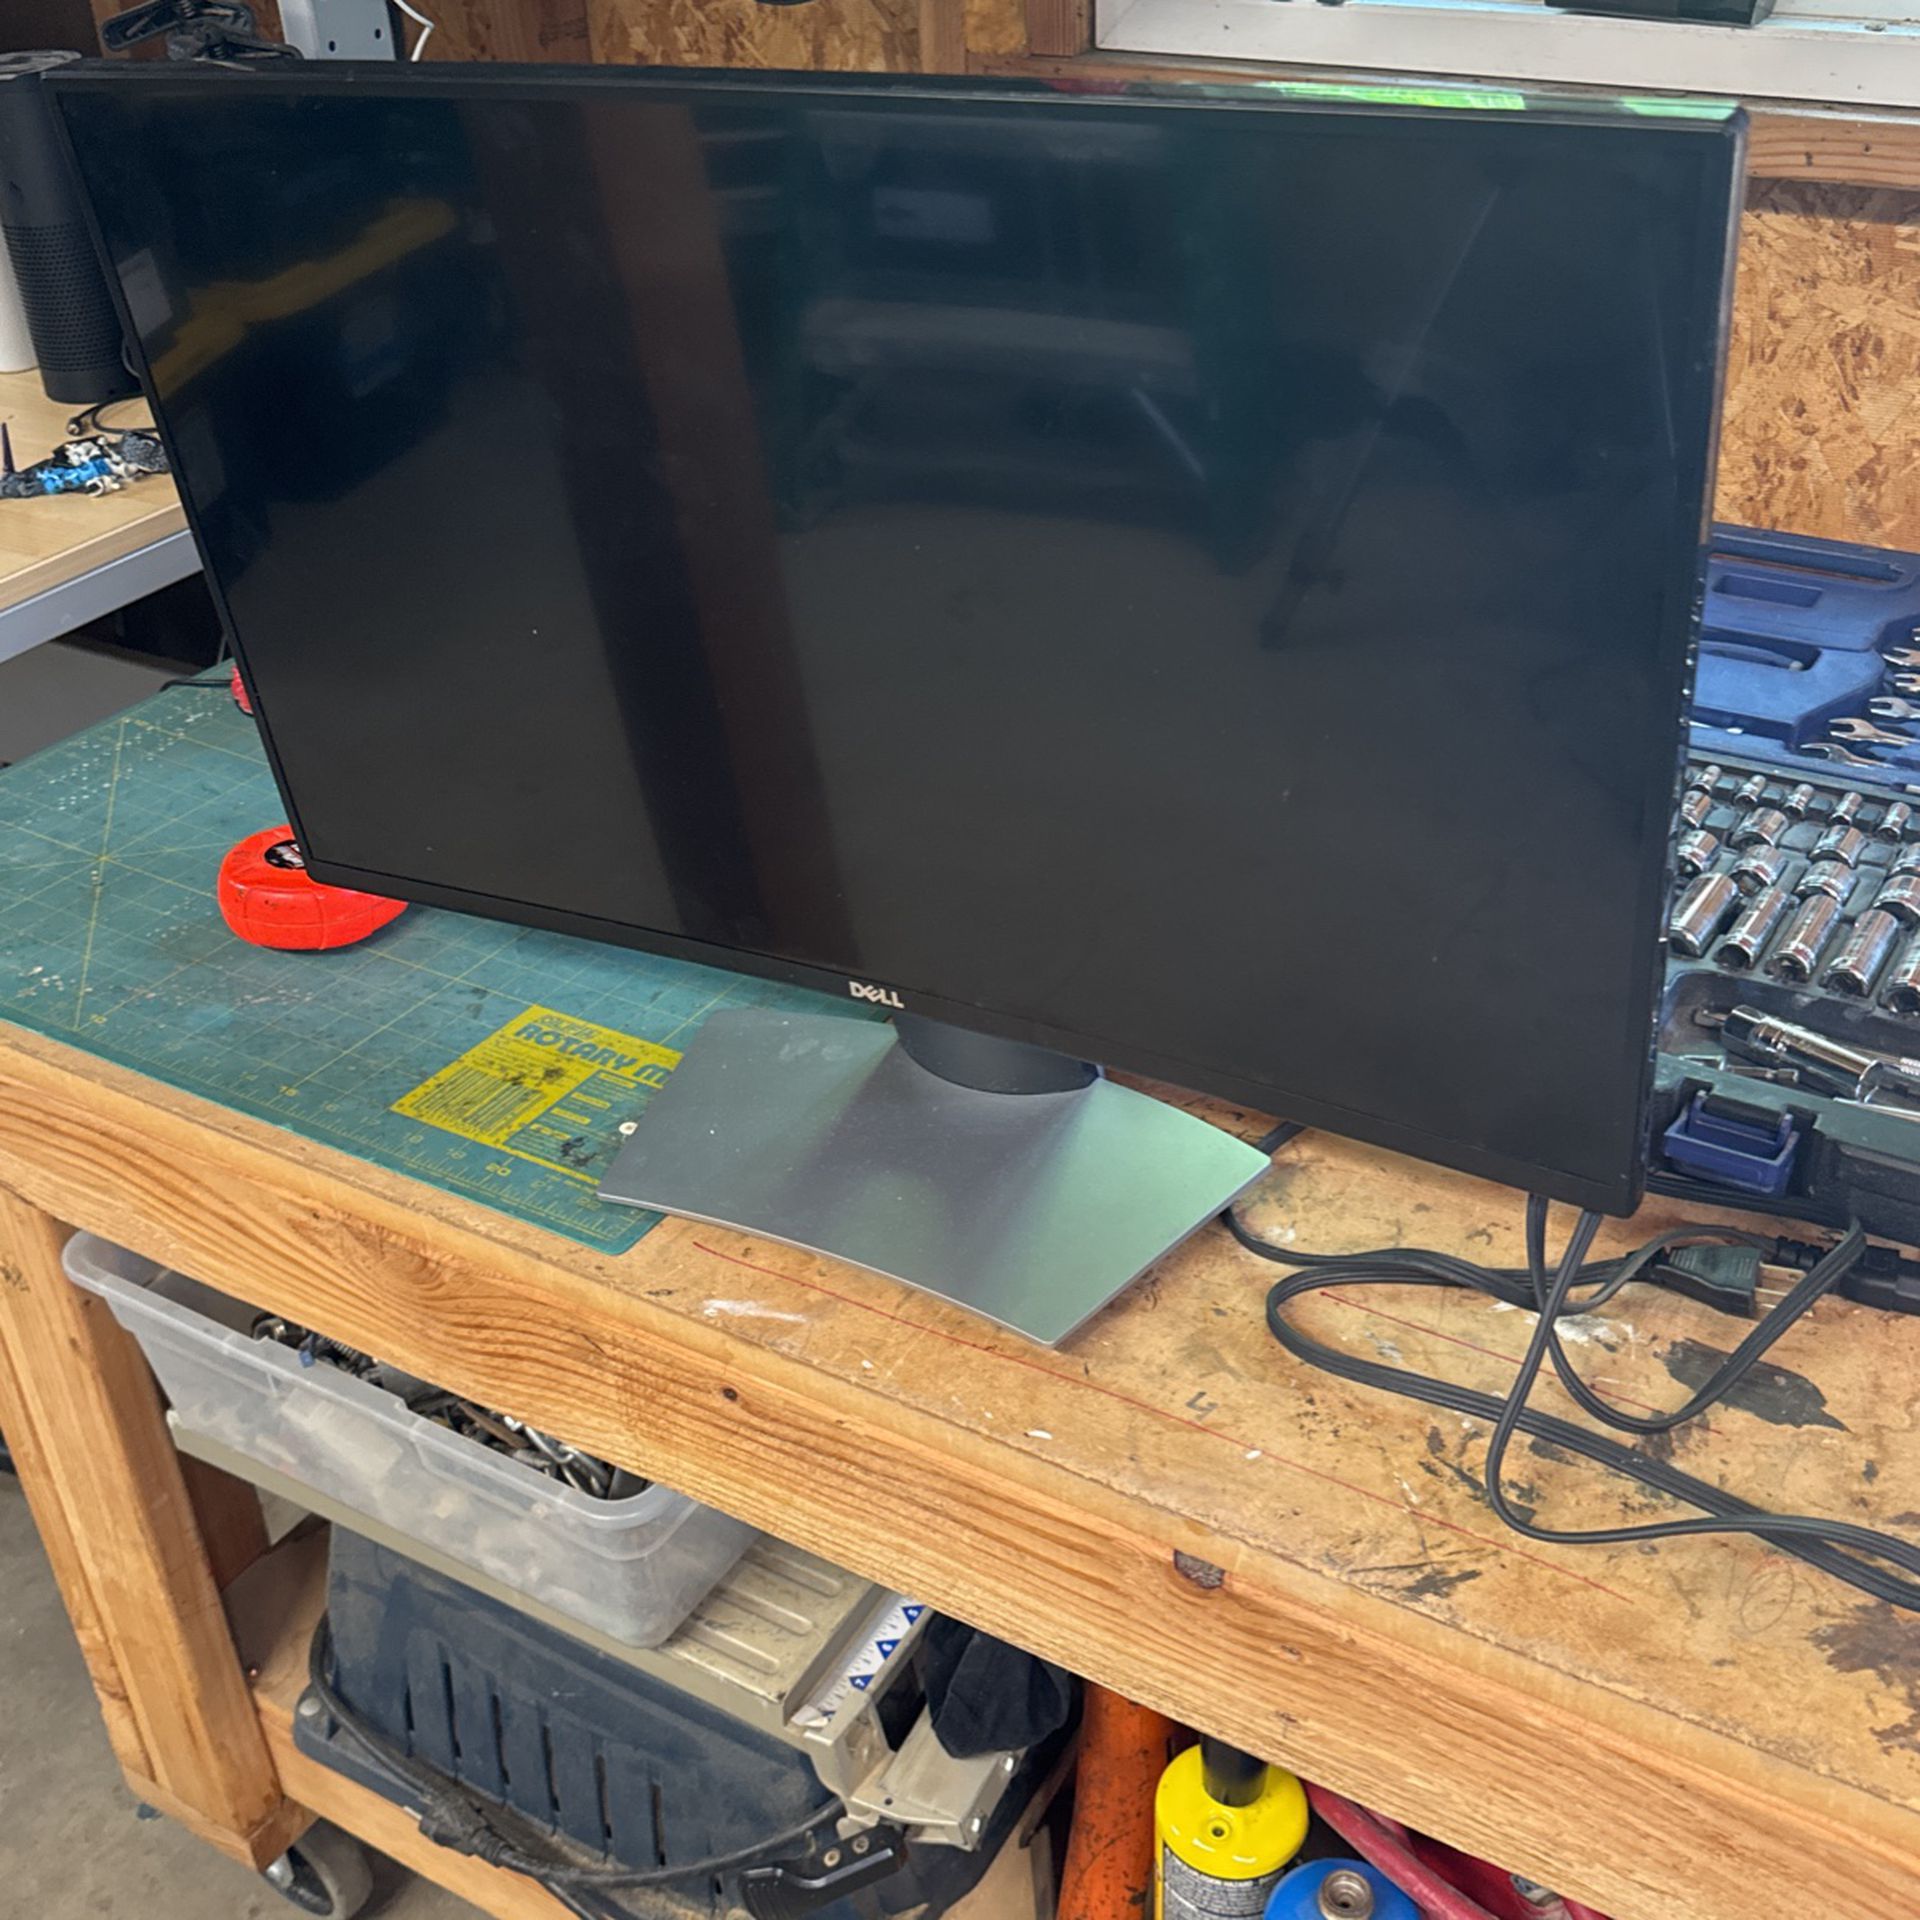 Dell Curved 27 Inch Monitor W/ Speakers